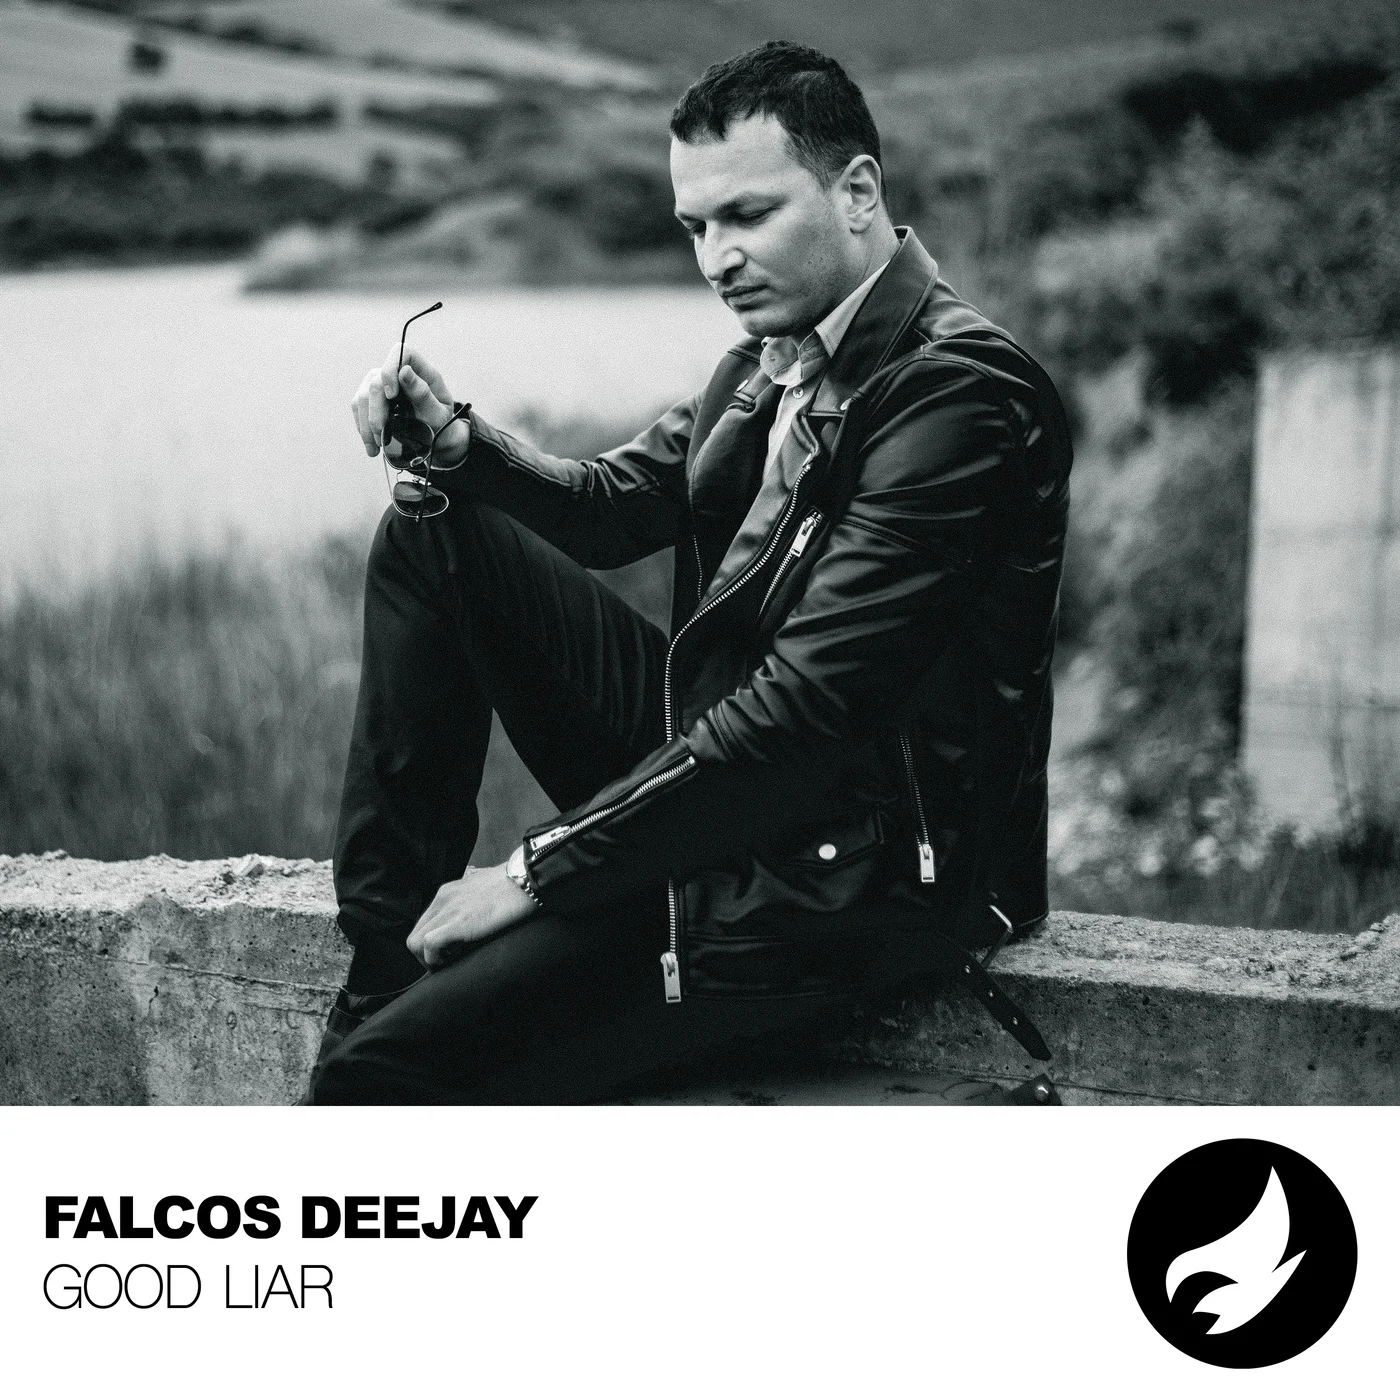 Don’t Miss Out on the Infectious Beat of ‘Good Liar’ by Falcos Deejay